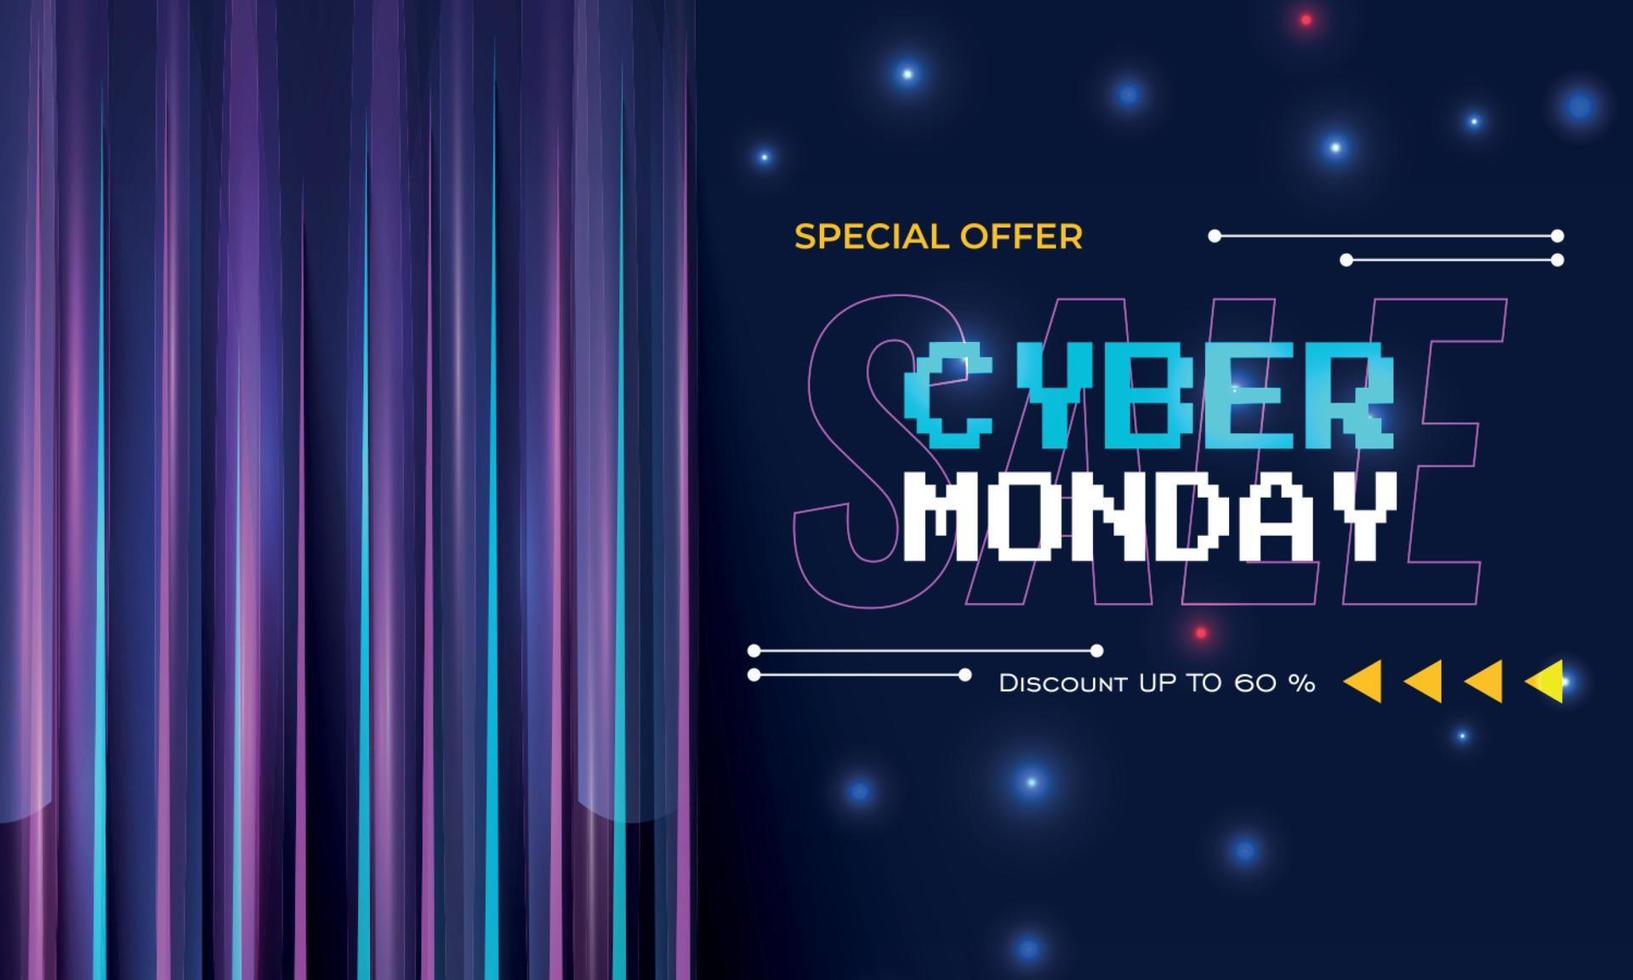 Cyber monday special sale offer promotion vector